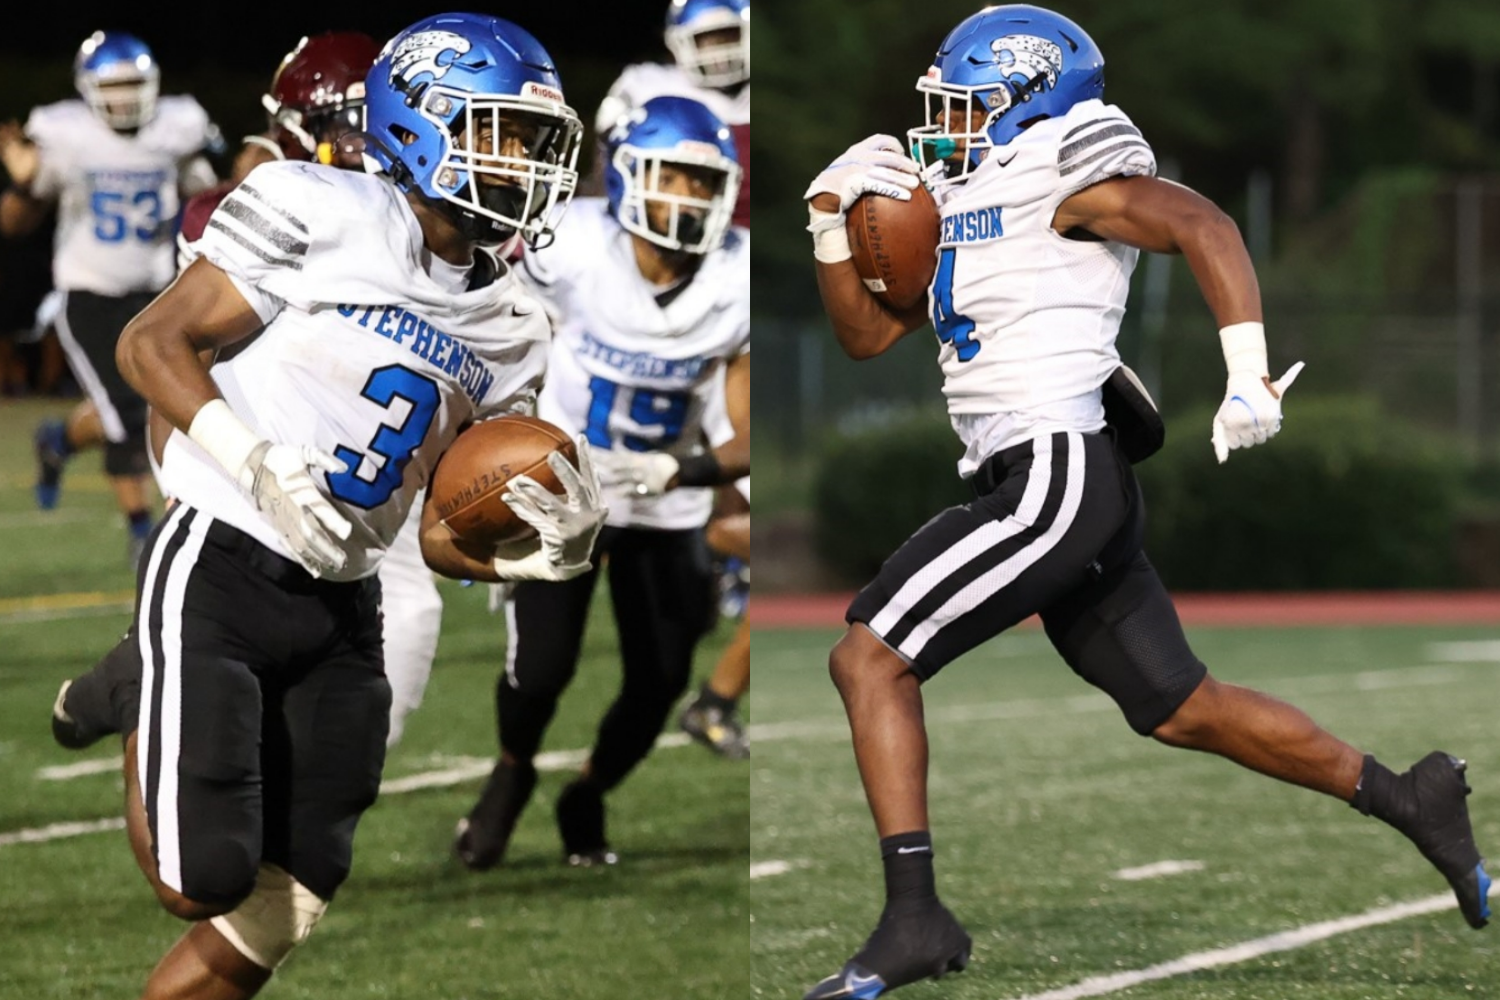 Stephenson's one-two punch at running back Cheik Keita (left) and Devin Ingram (right) combined for 210 yards rushing and three touchdowns to lead the Jaguars to a 28-3 win over the Tucker Tigers. (Photos by Arielle Hayes)